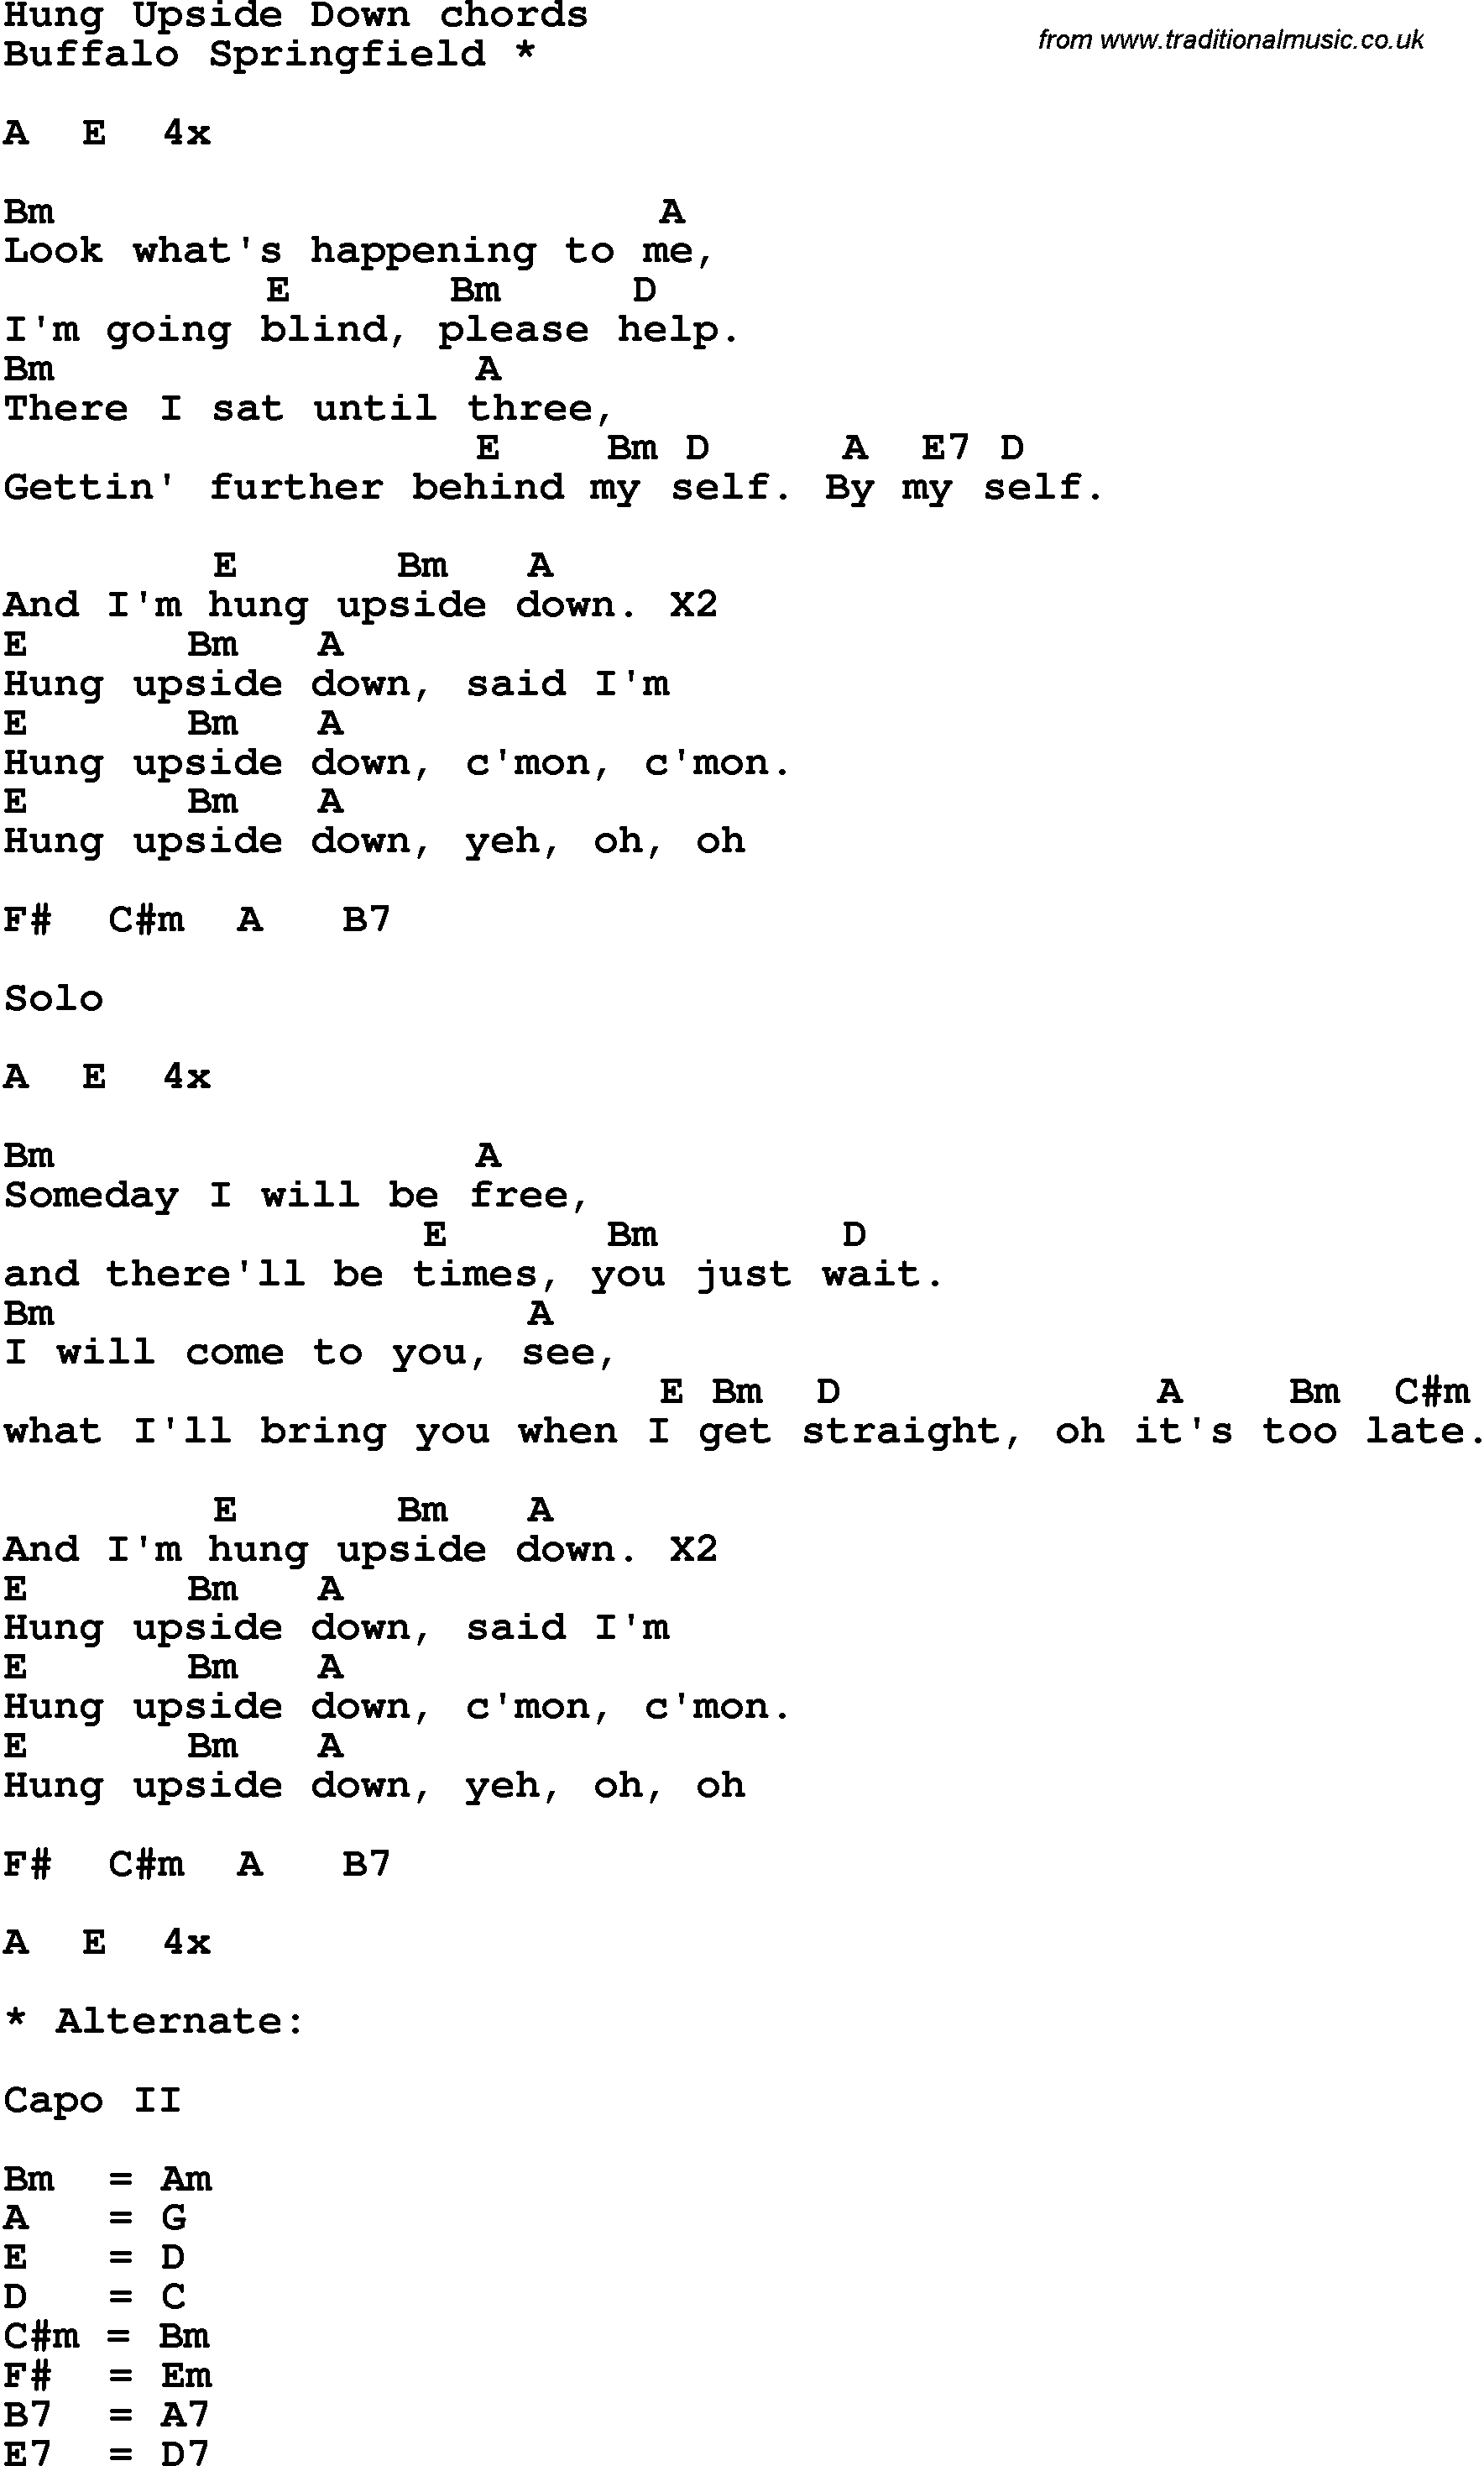 Song Lyrics with guitar chords for Hung Upside Down